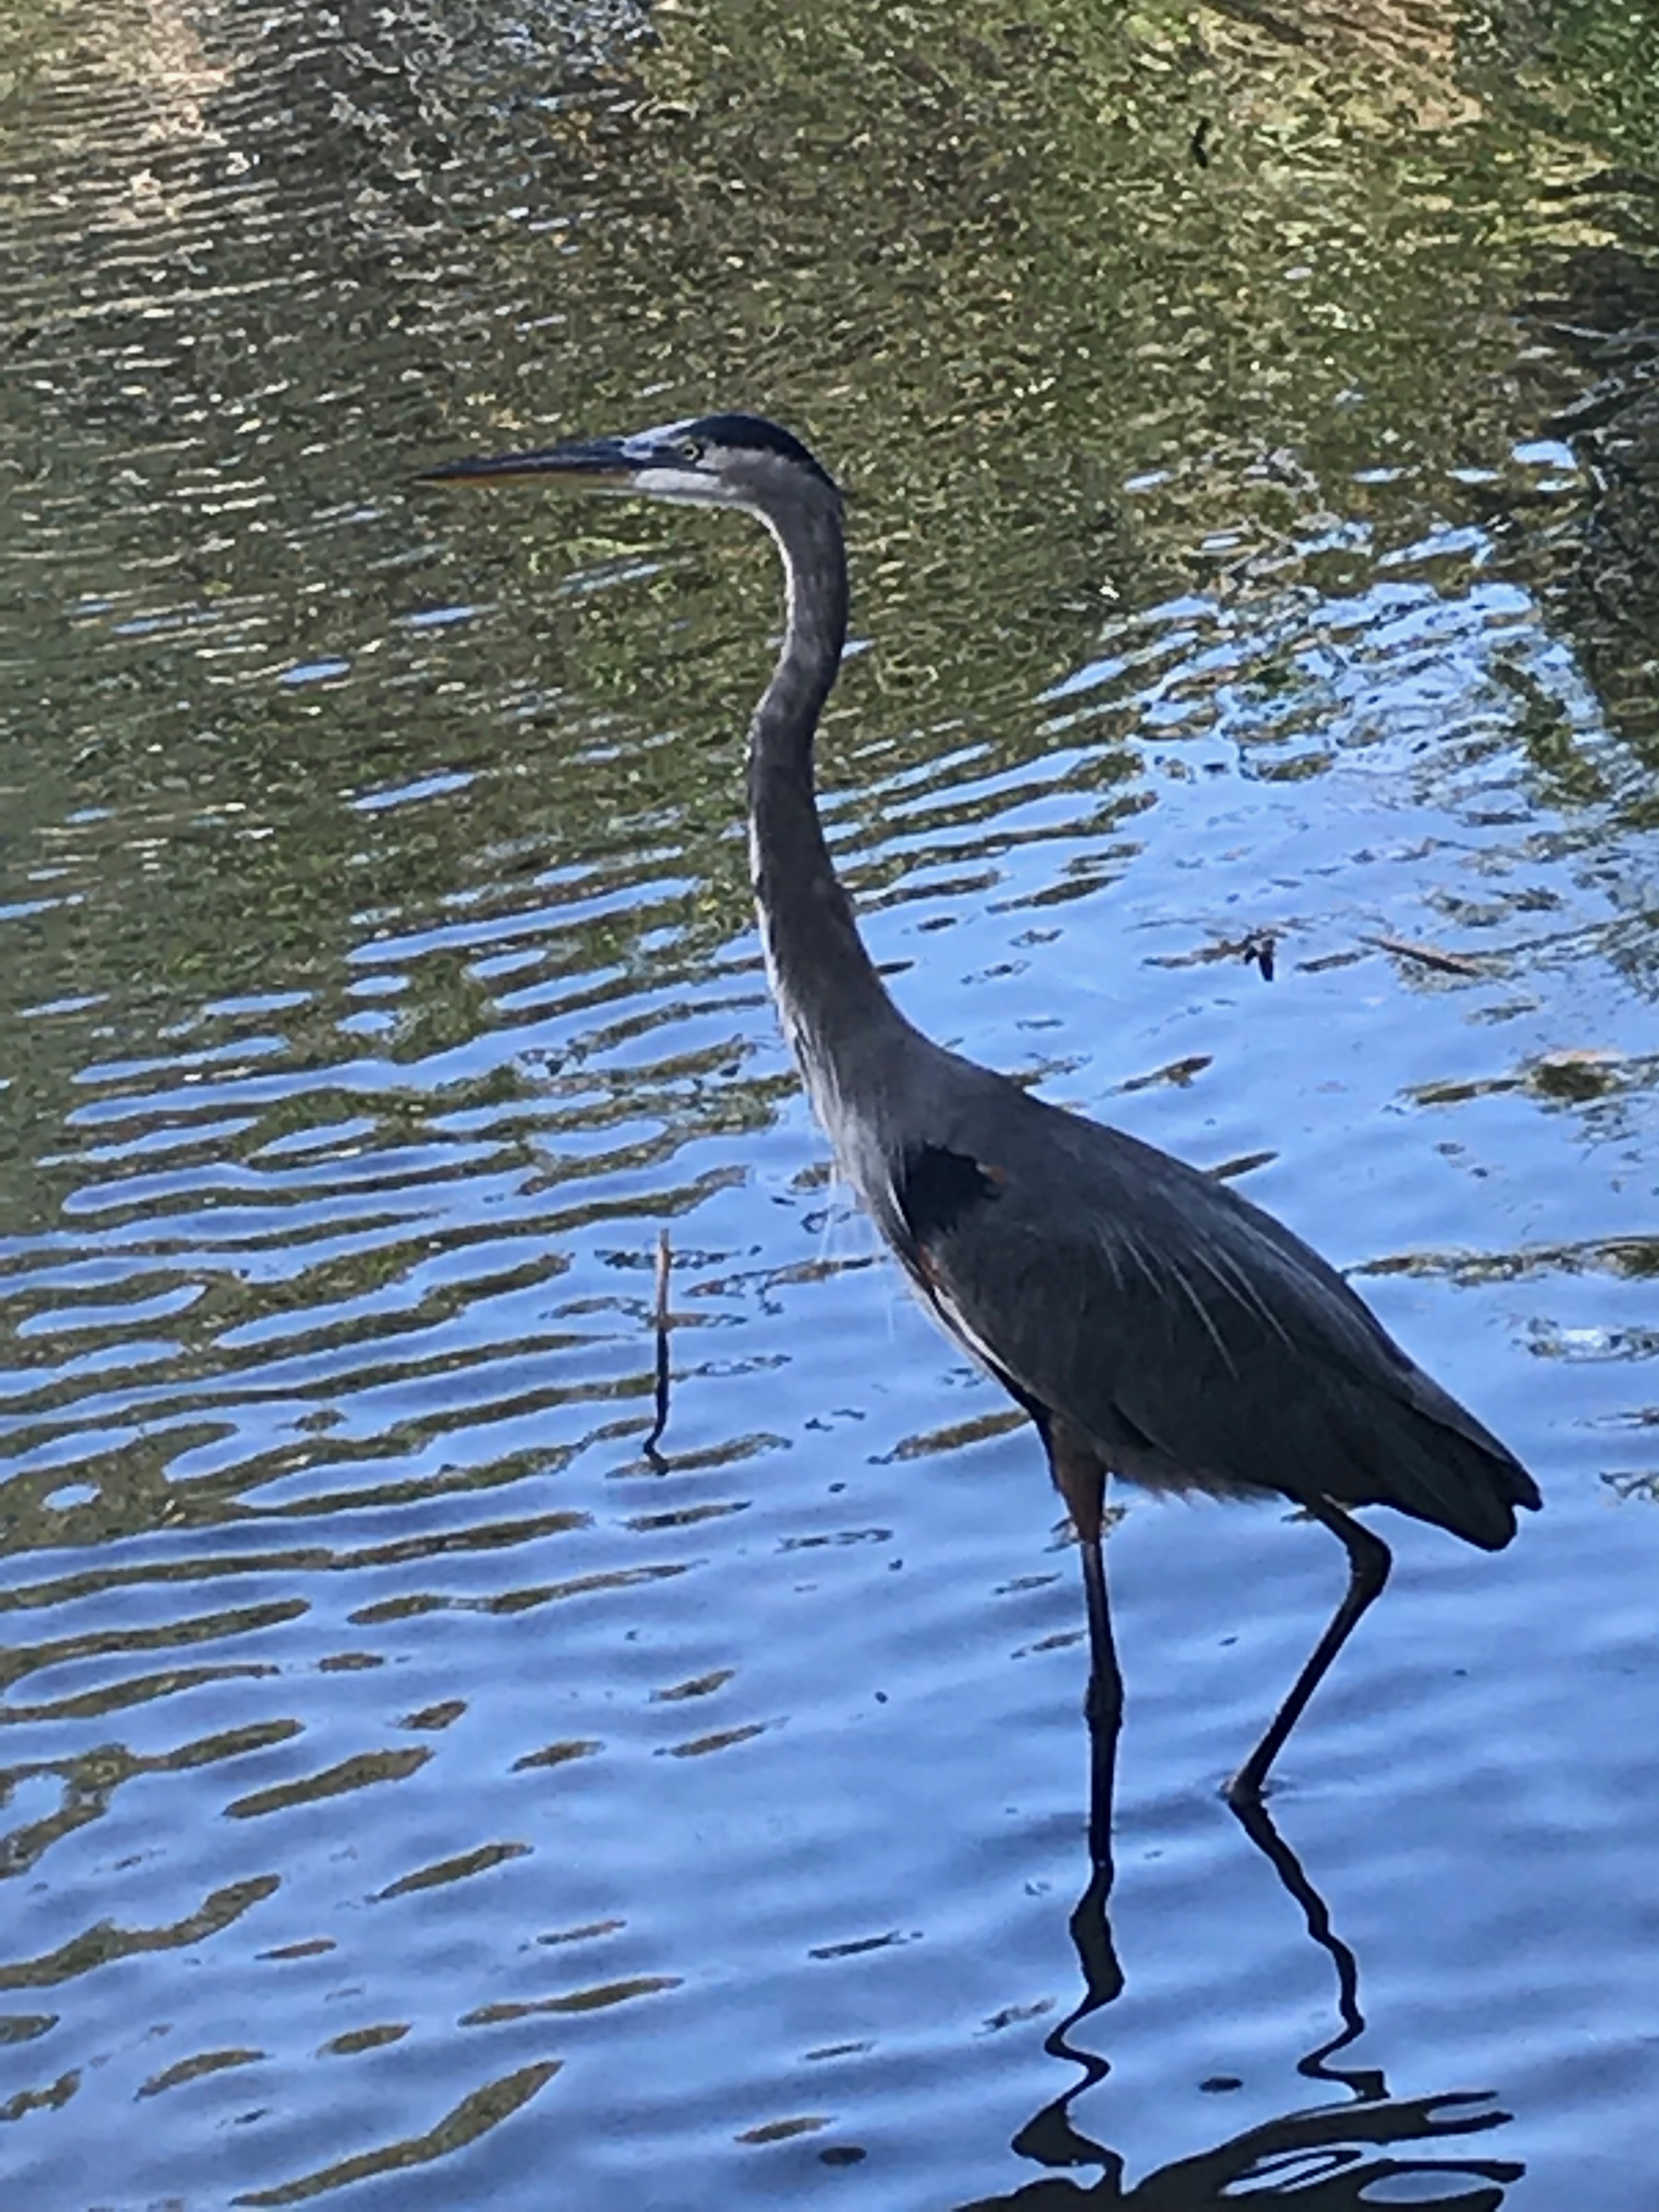 Heron waiting for his meal taken by 480 resident MS (iPhone 7)